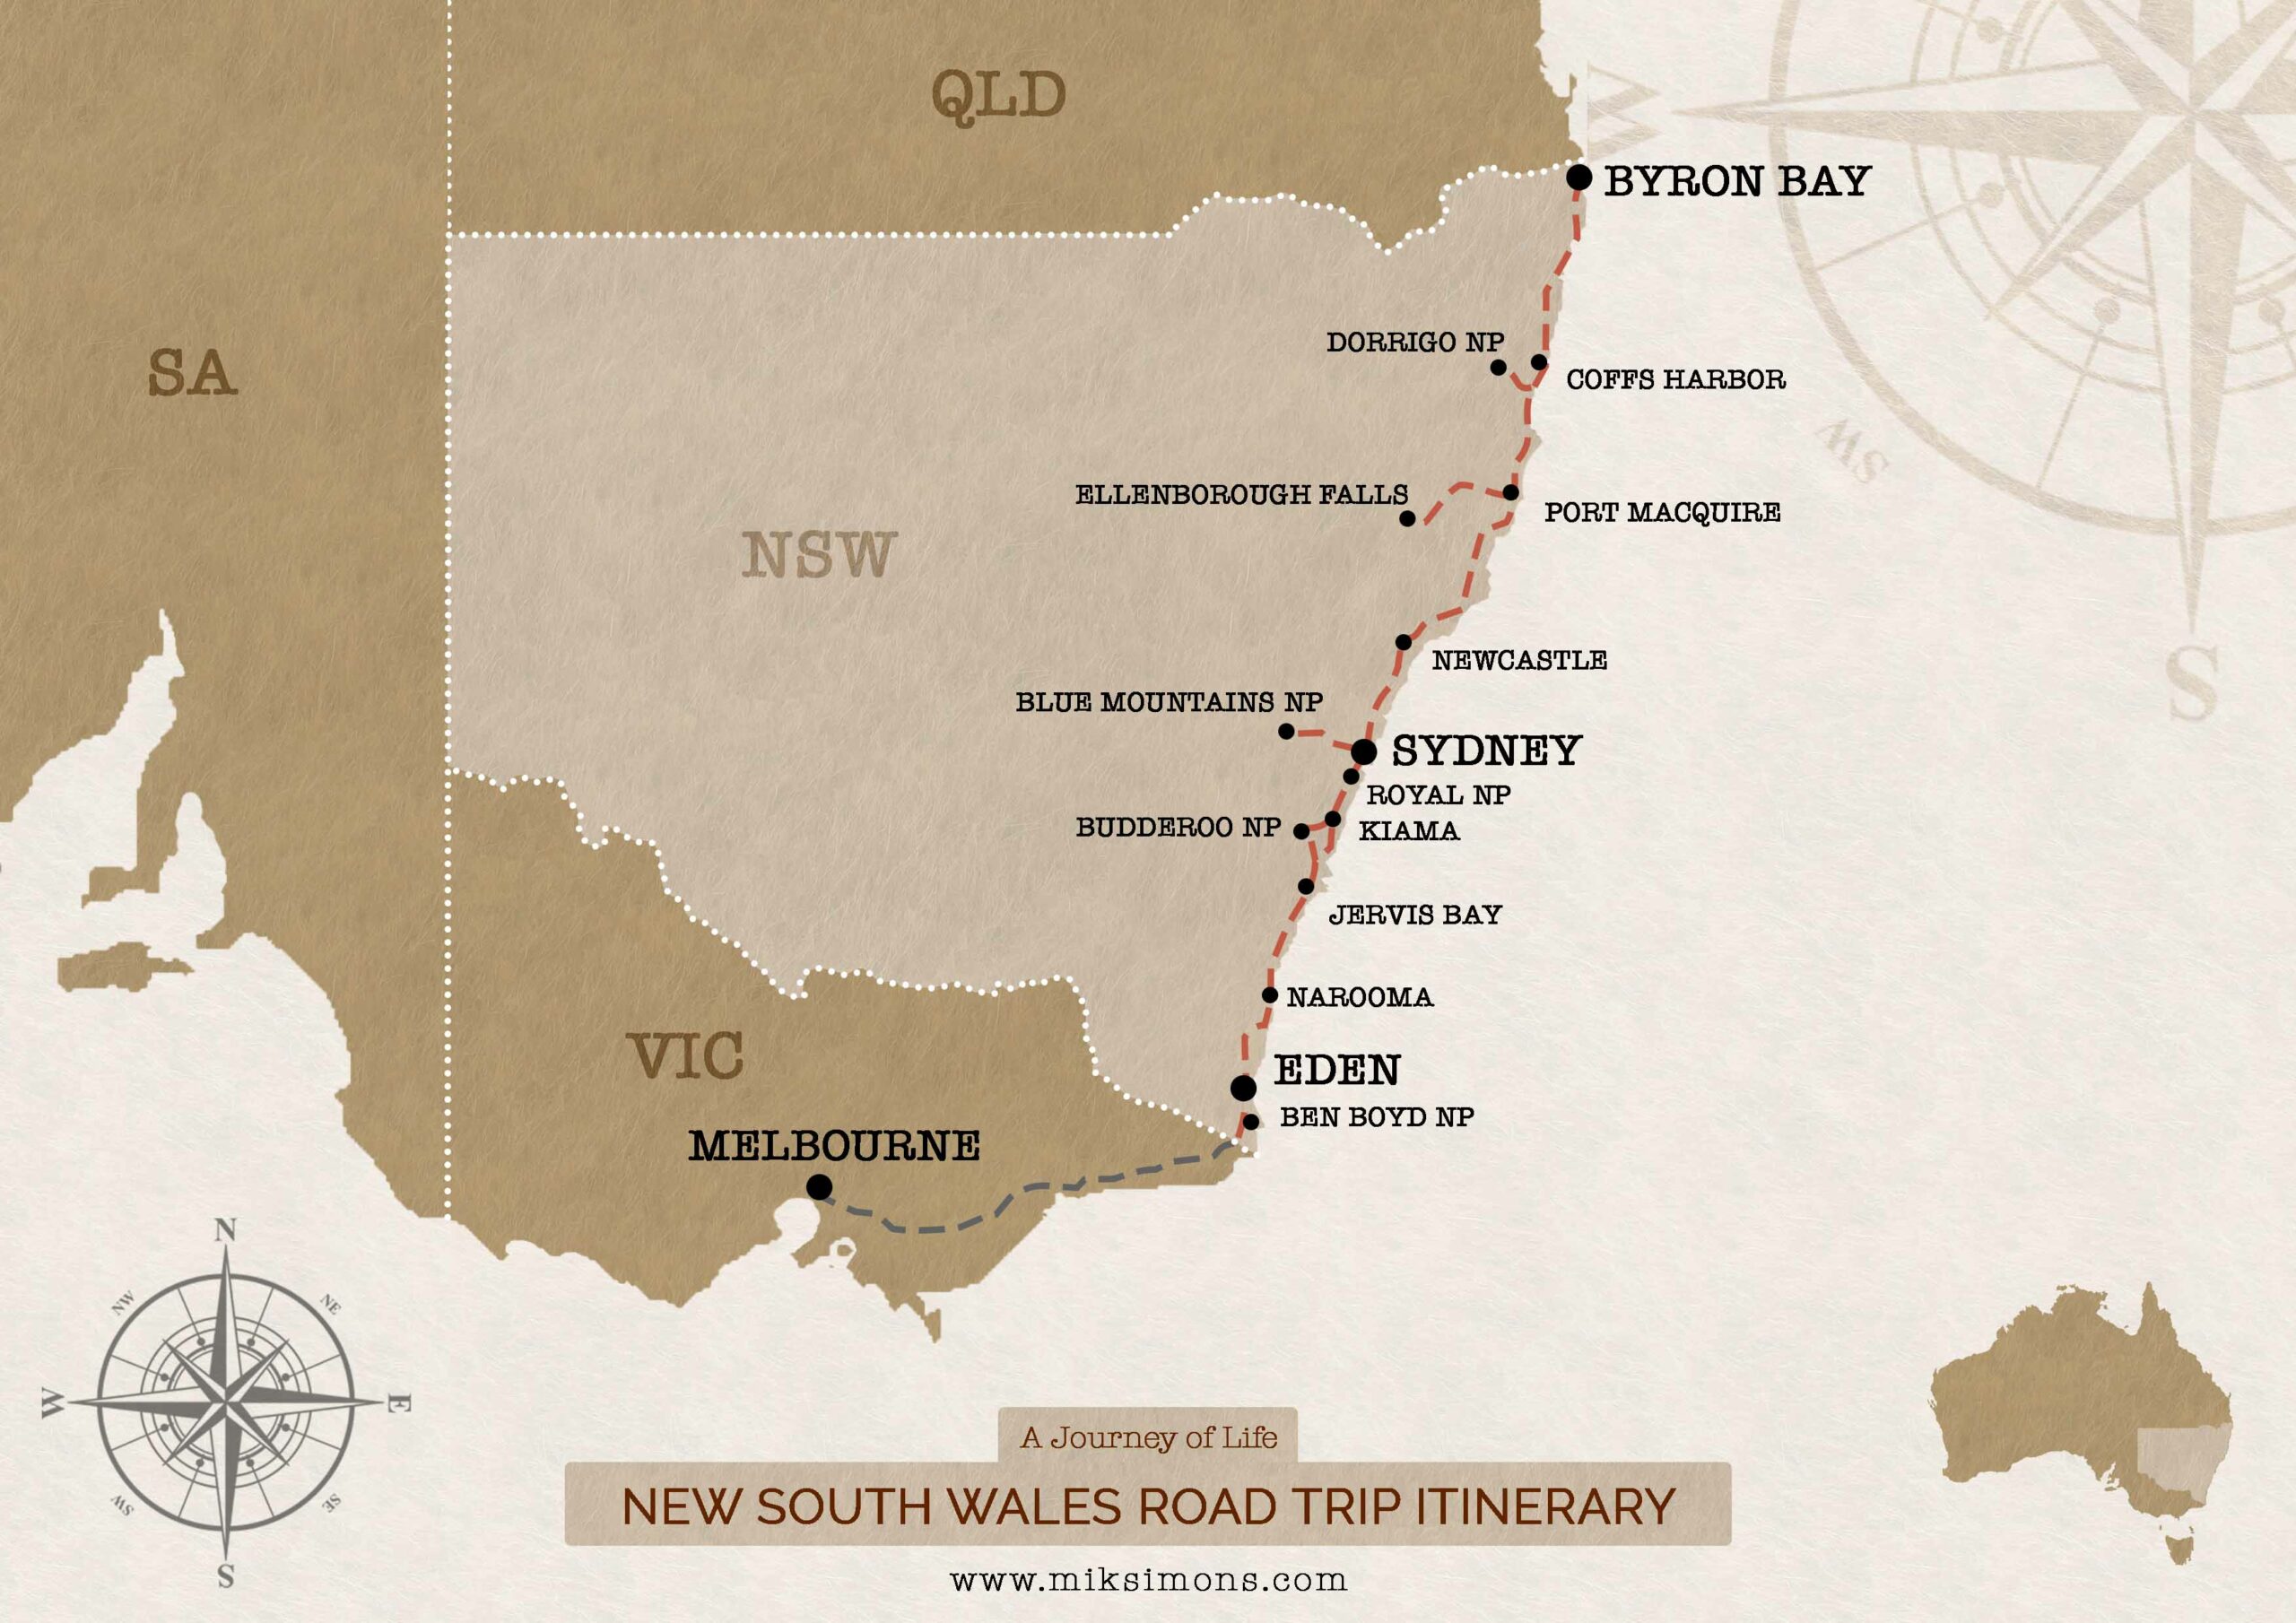 NSW Road Trip Itinerary 2021 - Map of New South Wales